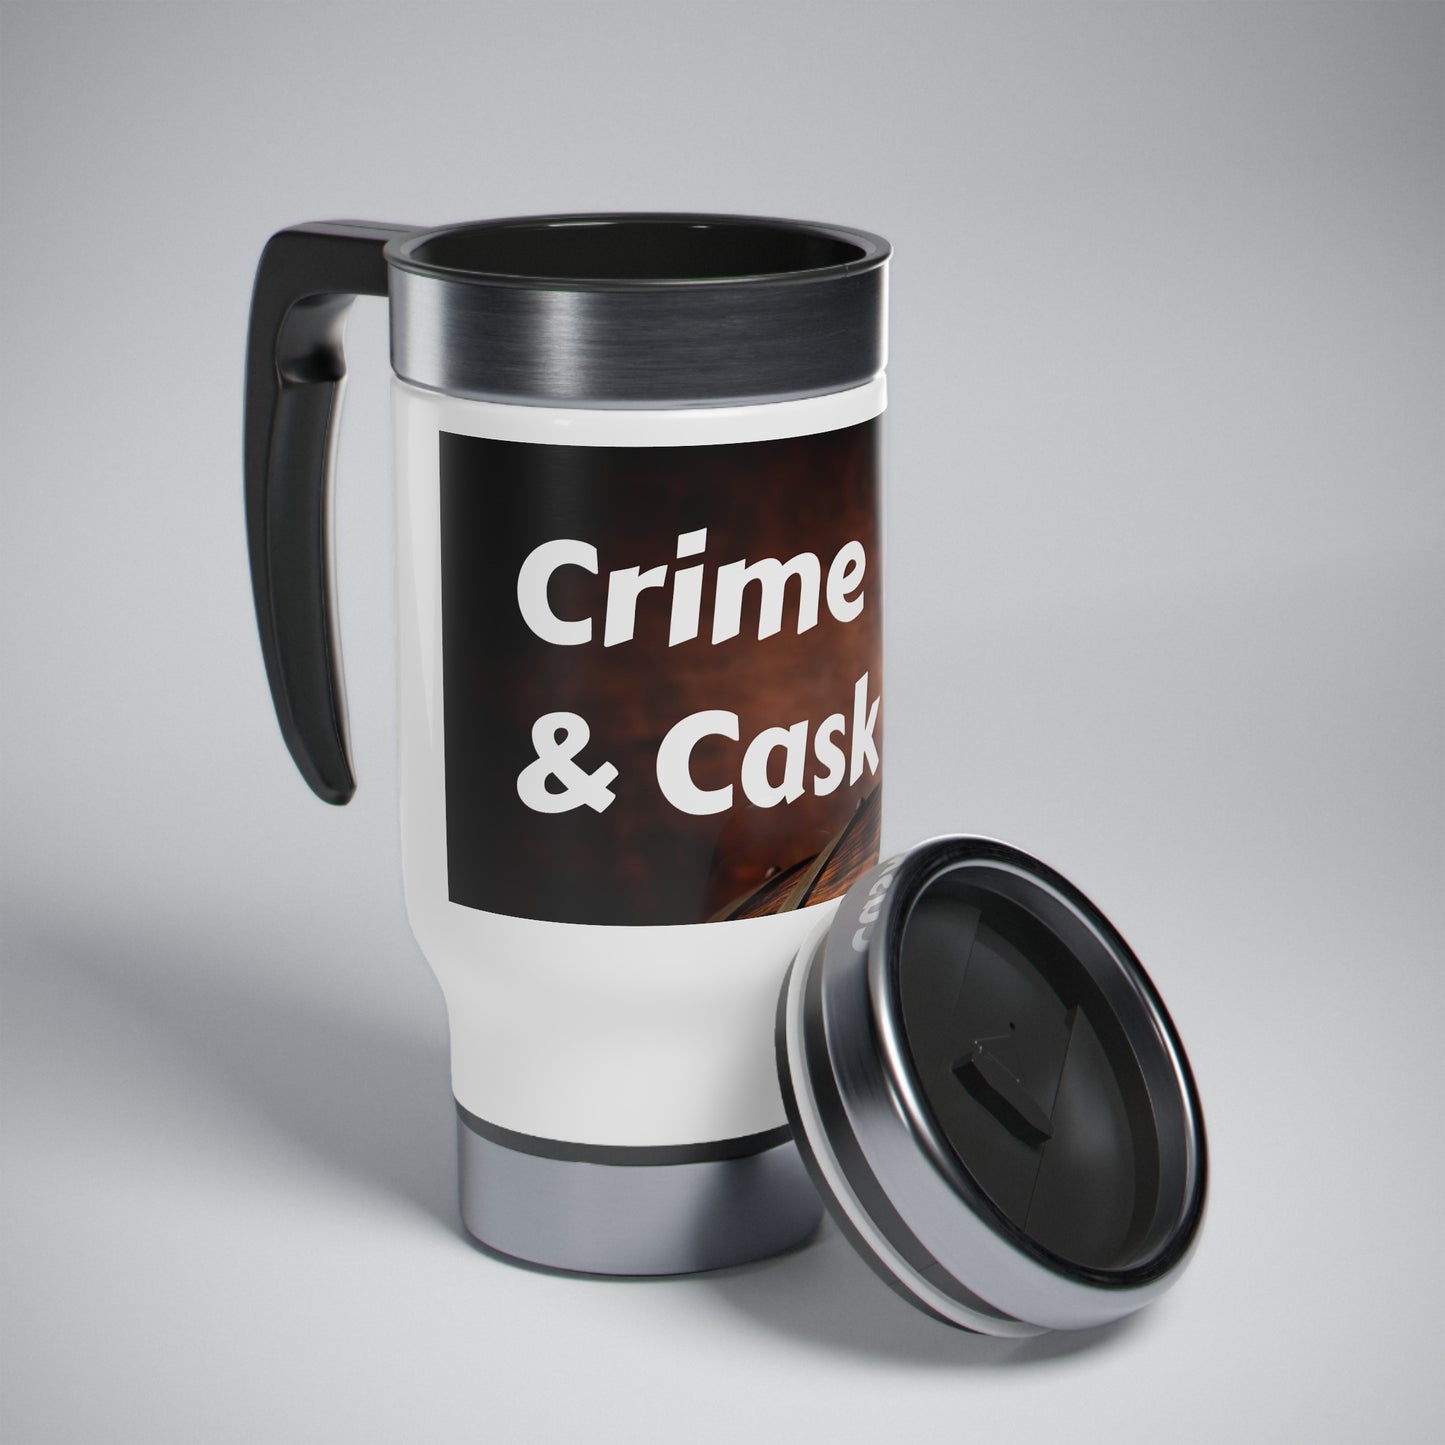 Crime and Cask Stainless Steel Travel Mug with Handle, 14oz